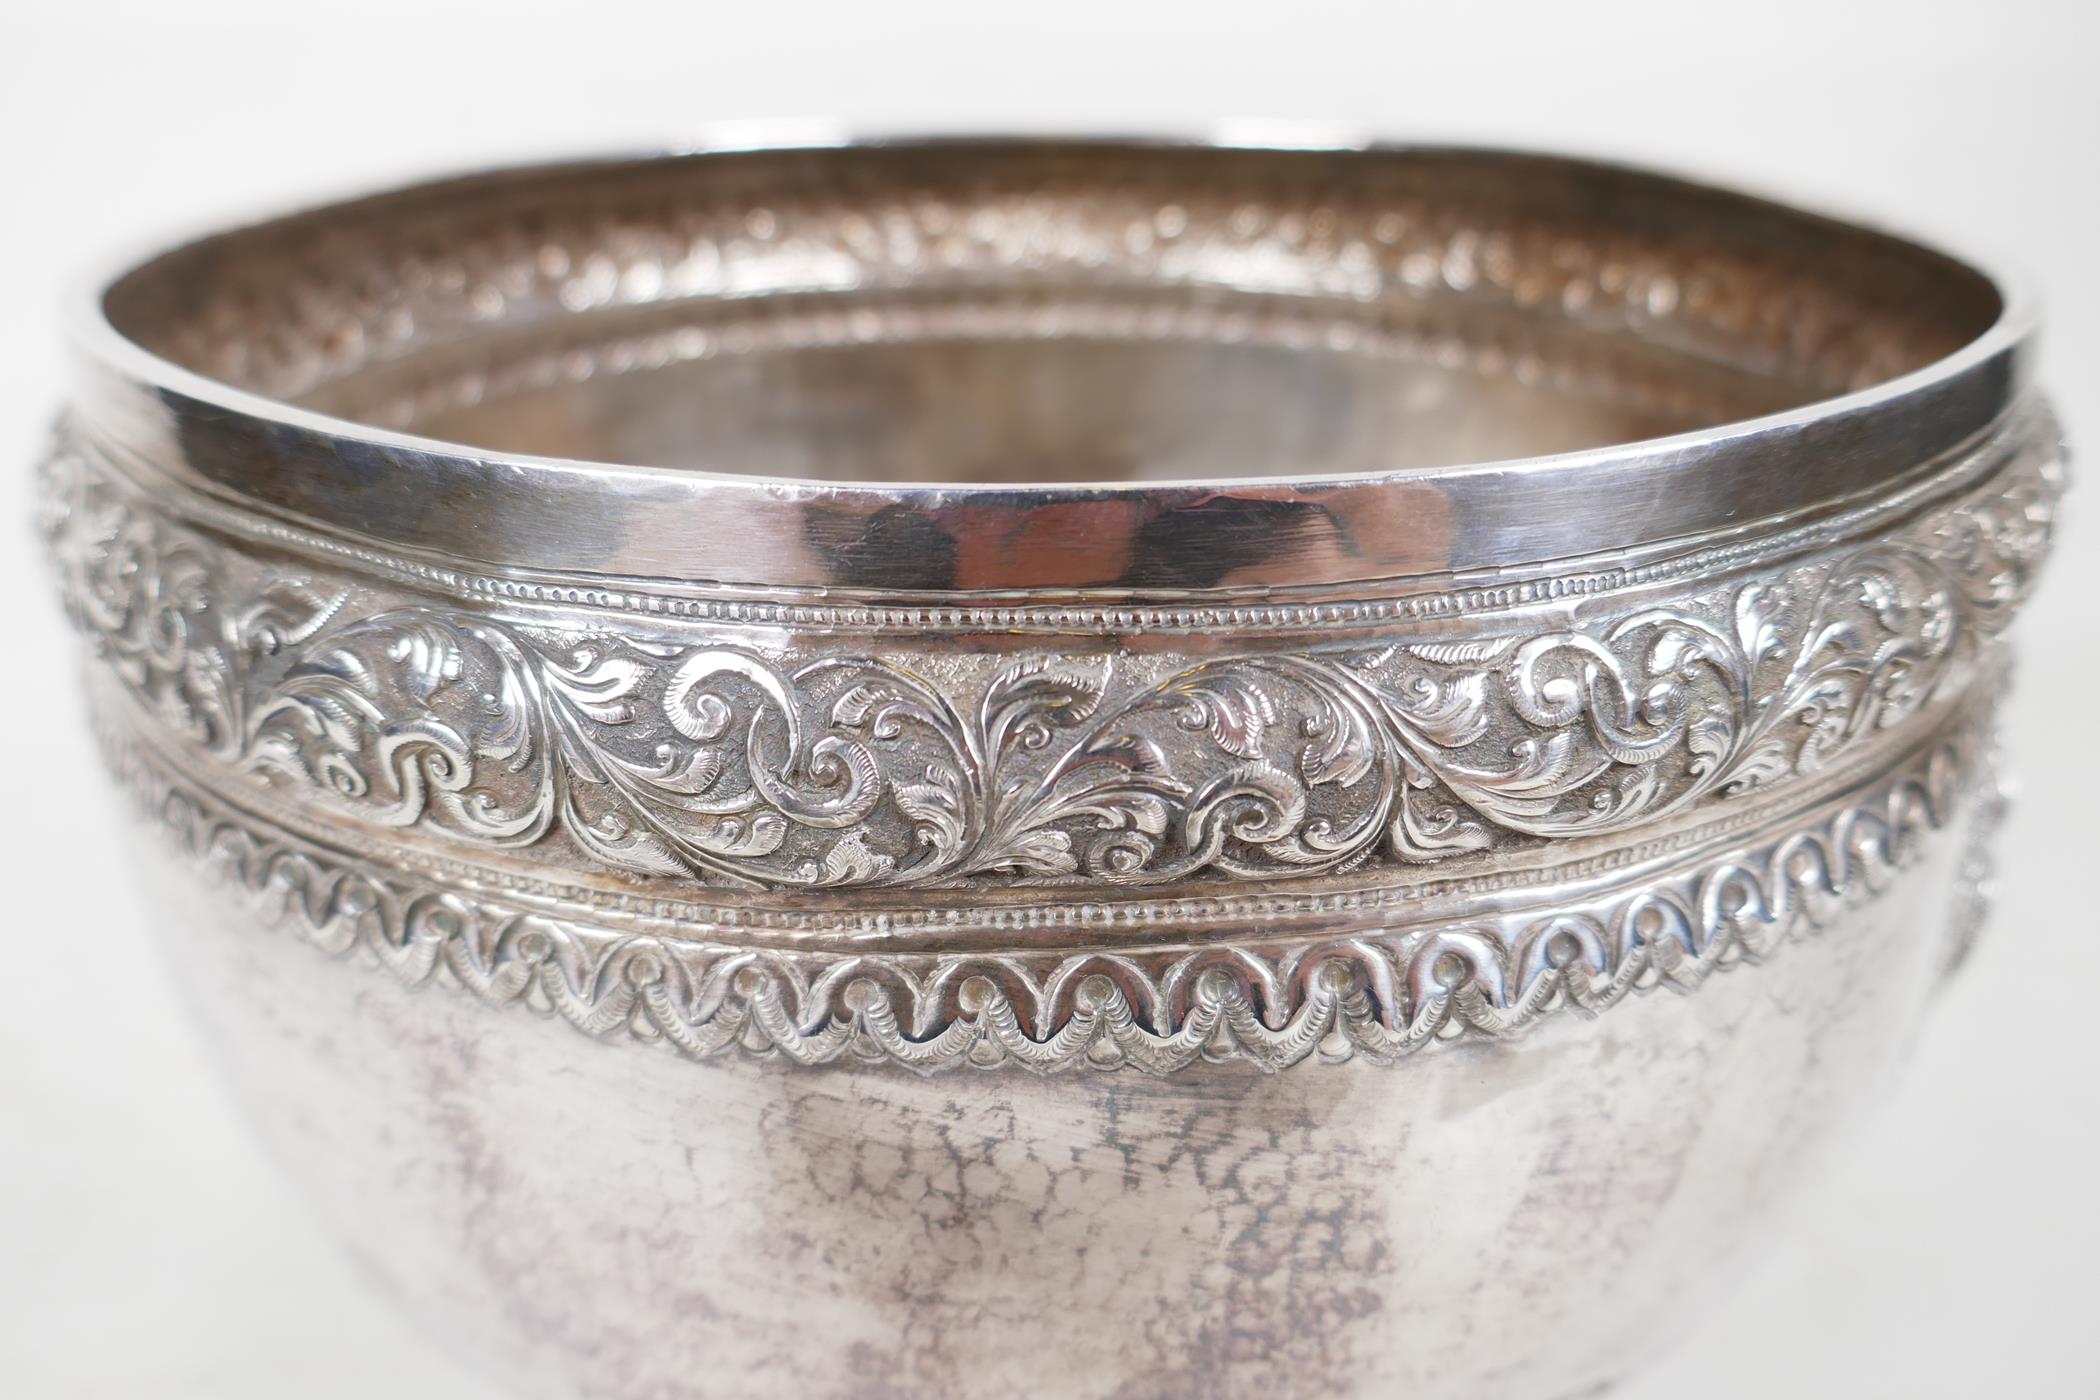 An antique Indian silver bowl, hammered silver with embossed scrolling decoration, a bas relief - Image 4 of 8